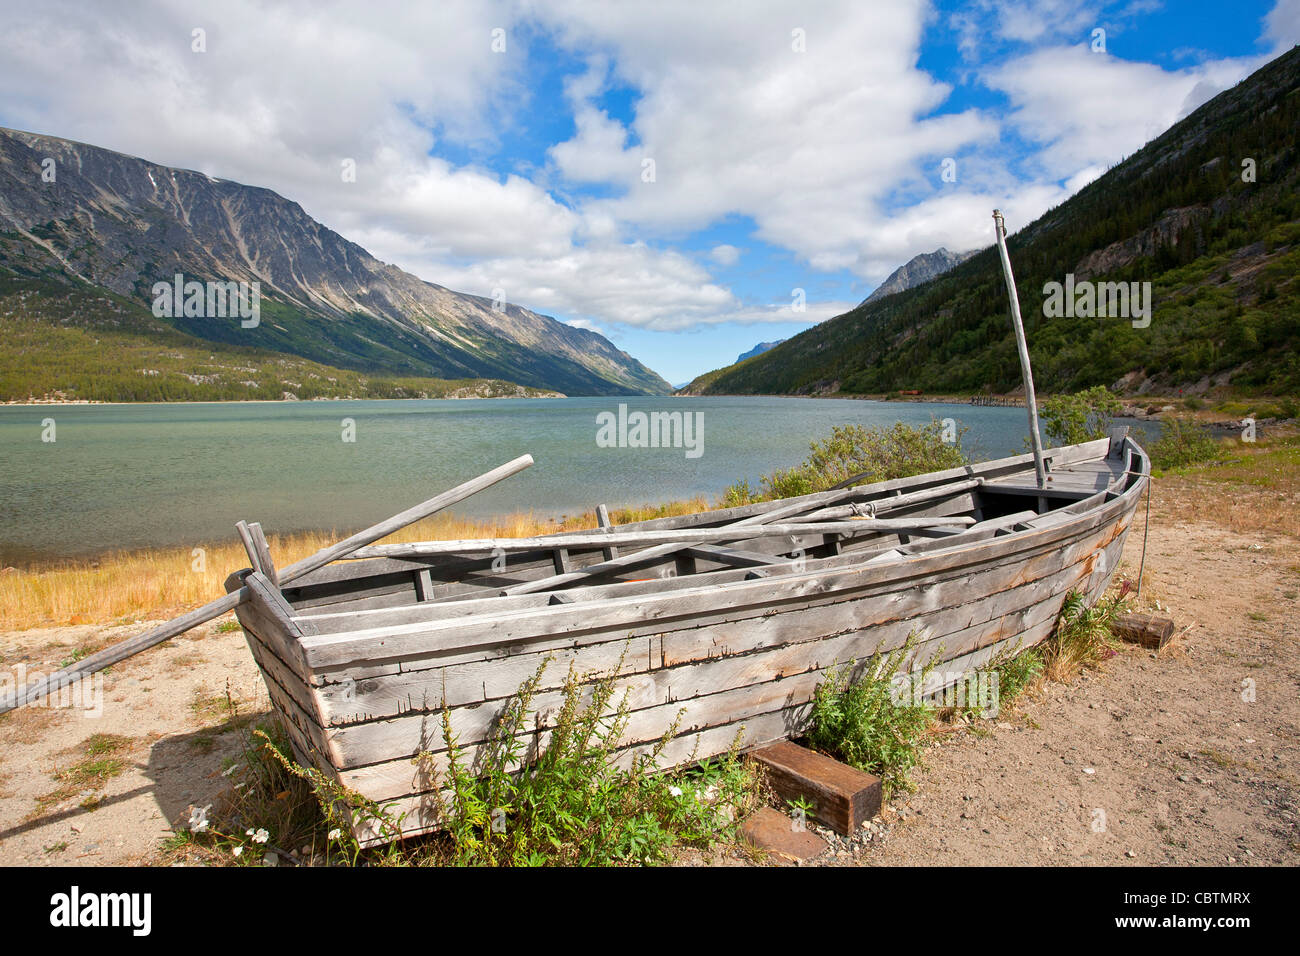 A replica of one of the boats used by de gold stampeders on their way to the Klondike in 1898. Lake Bennett. Canada Stock Photo